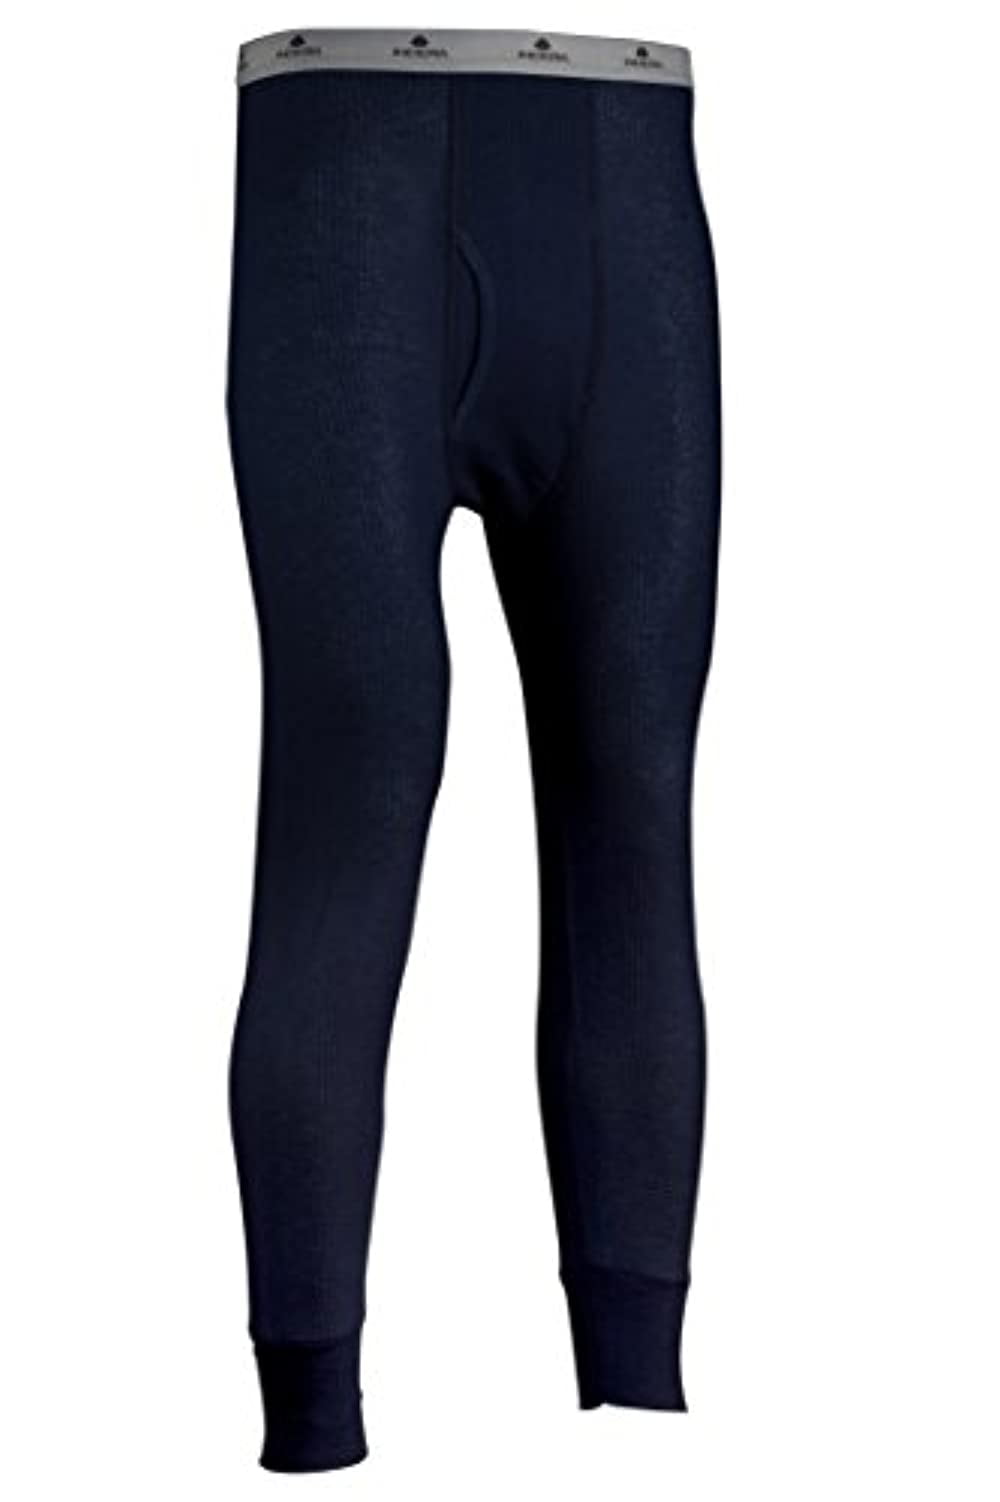  Indera Traditional Long Johns Thermal Underwear For Men In  Tall Sizes